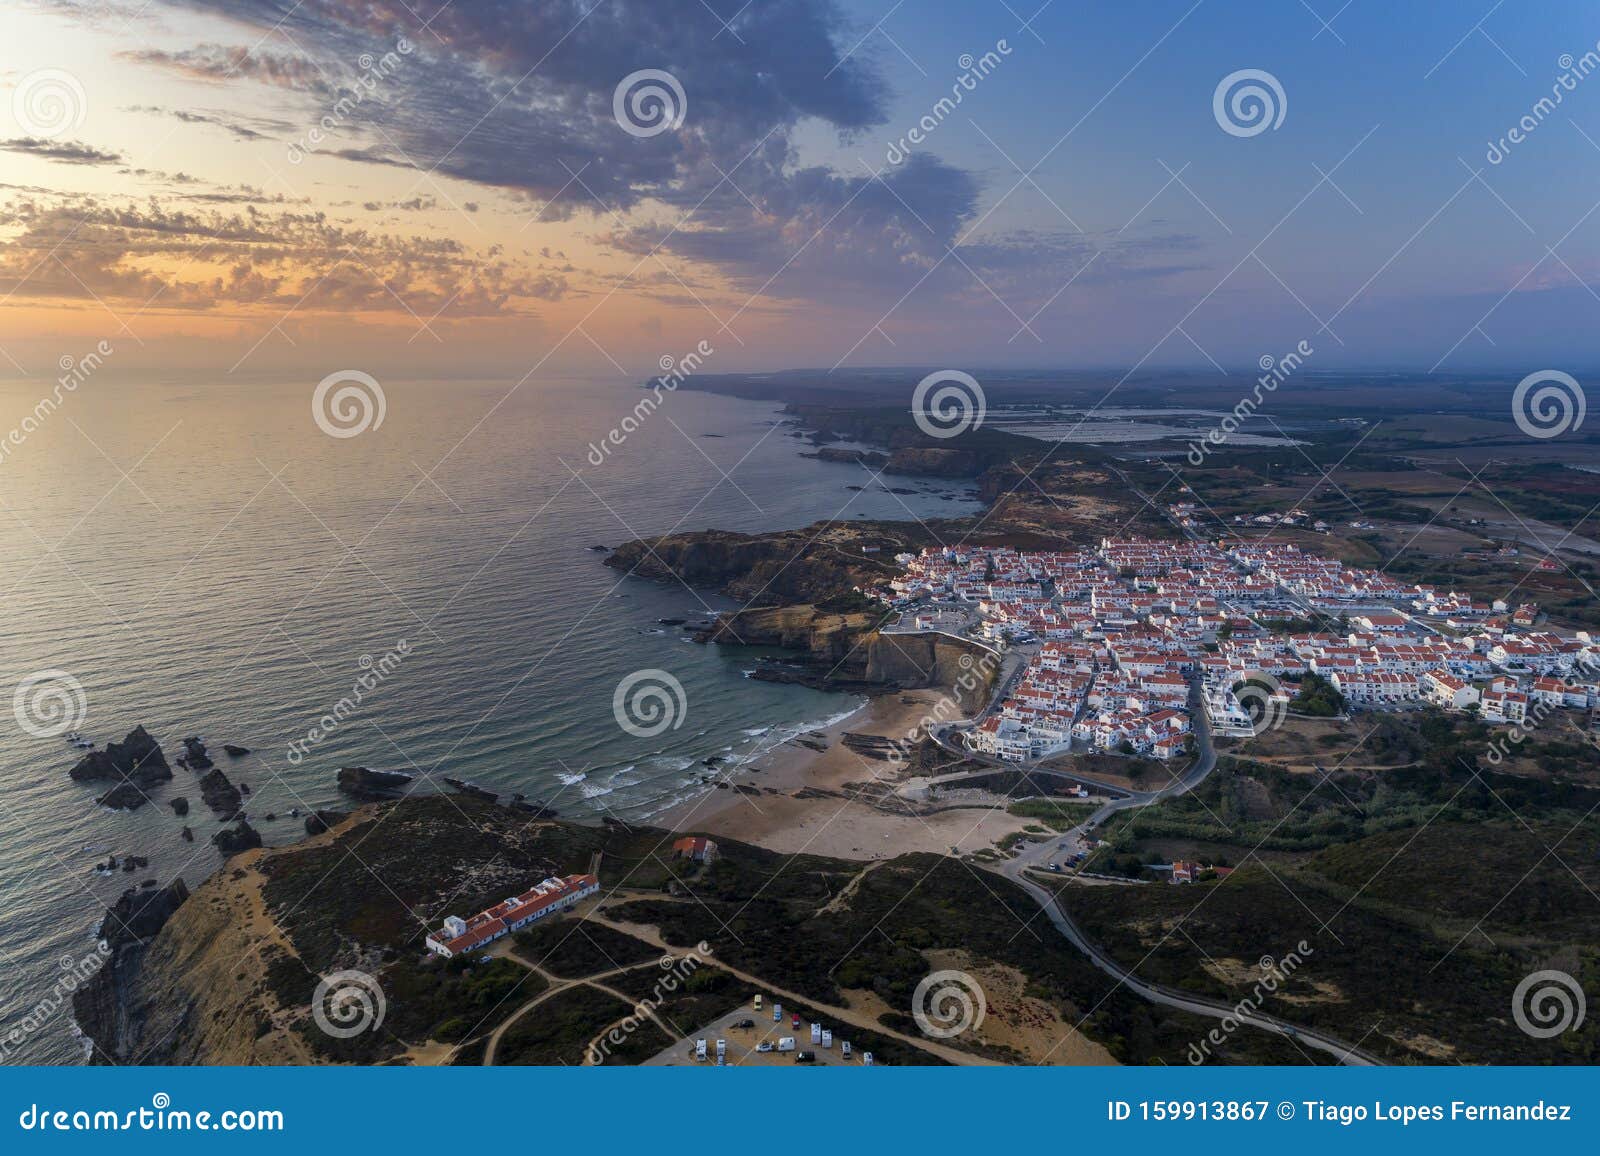 aerial view of the zambujeira do mar village and beach at sunset, in alentejo